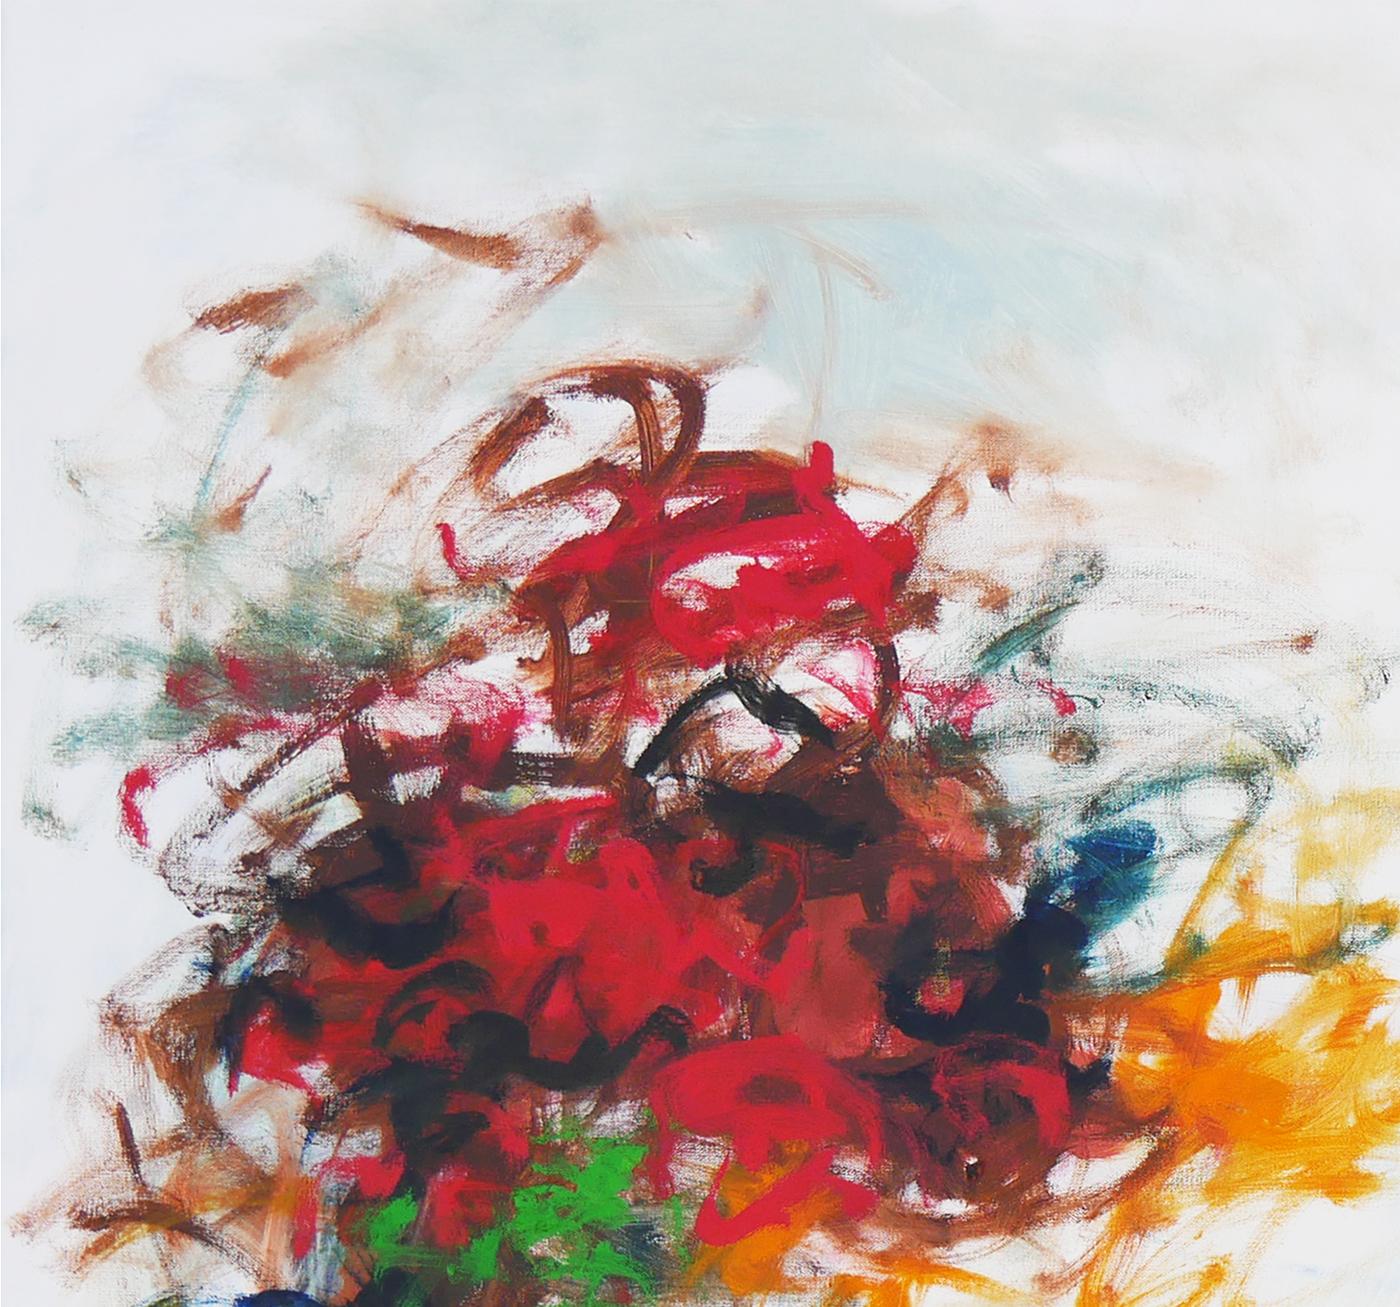 Red, yellow, blue, and green abstract expressionist painting by Texas artist Gerald Syler. The work features a balanced composition of large, colorful brush strokes set against a light background. Signed, titled, and dated by artist on reverse.